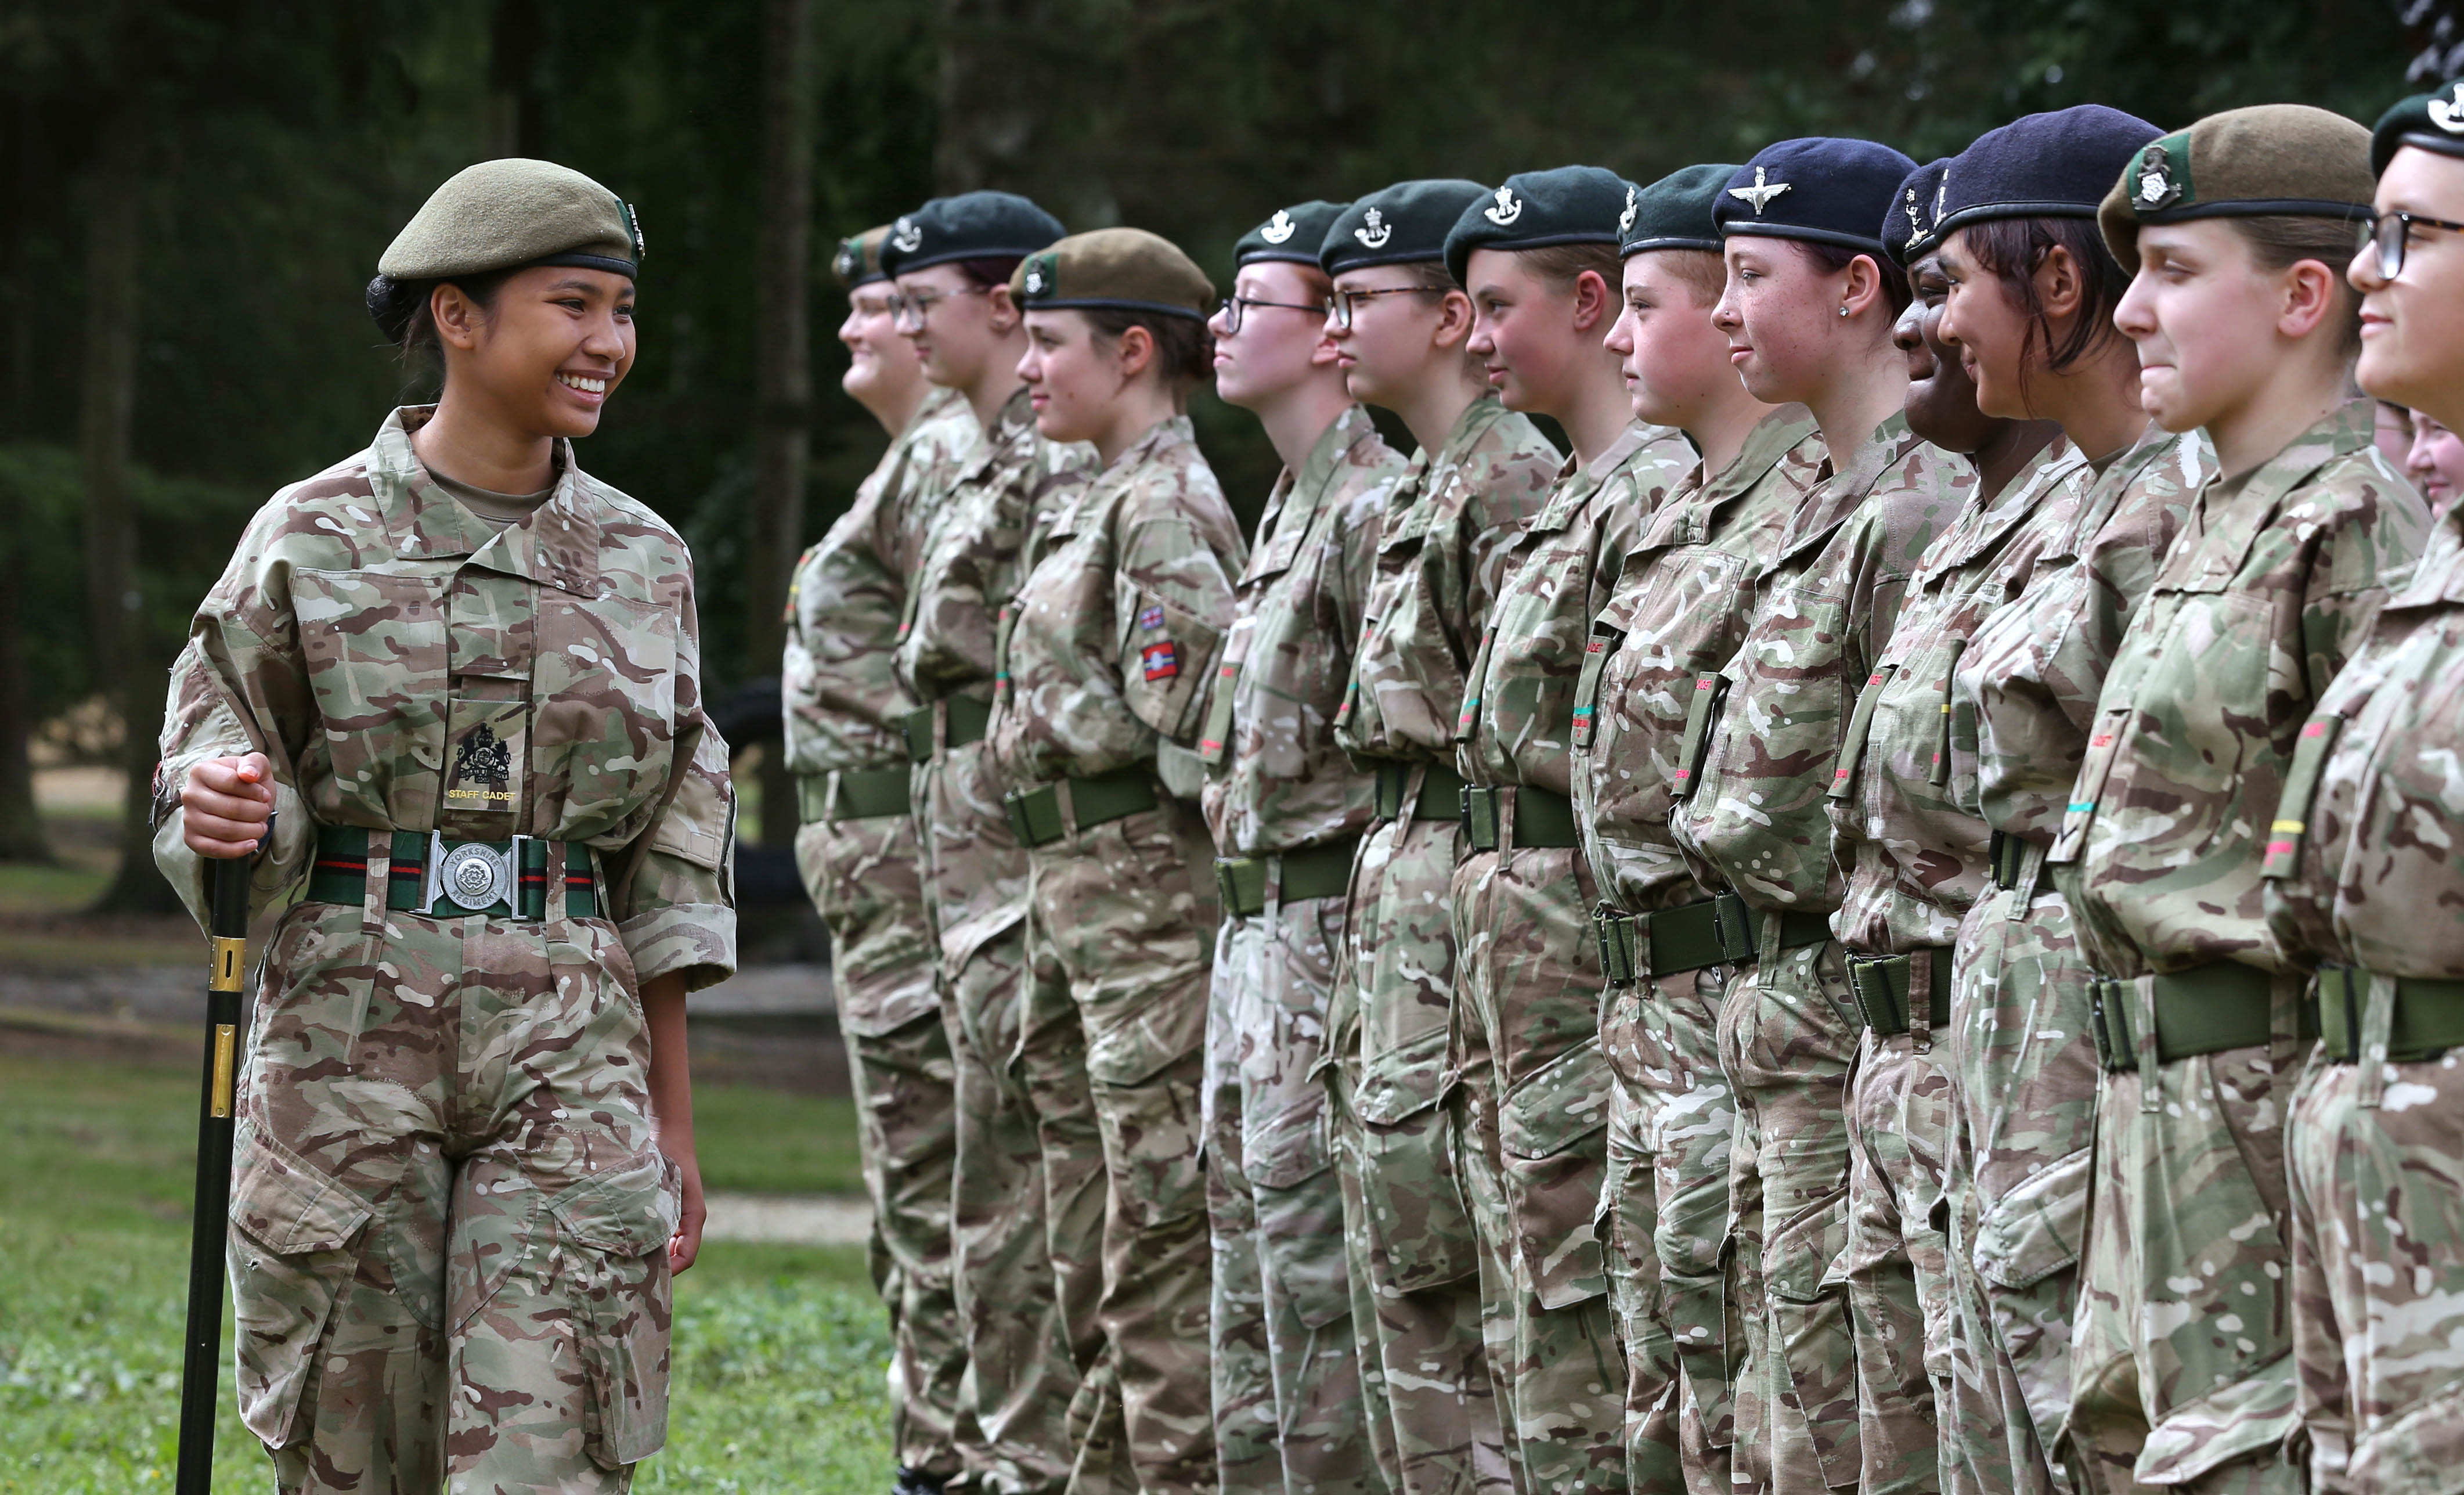 Ashanti Mai Holden inspects the Yorkshire Army cadets (Reserve Forces’ and Cadets’ Associations/PA)